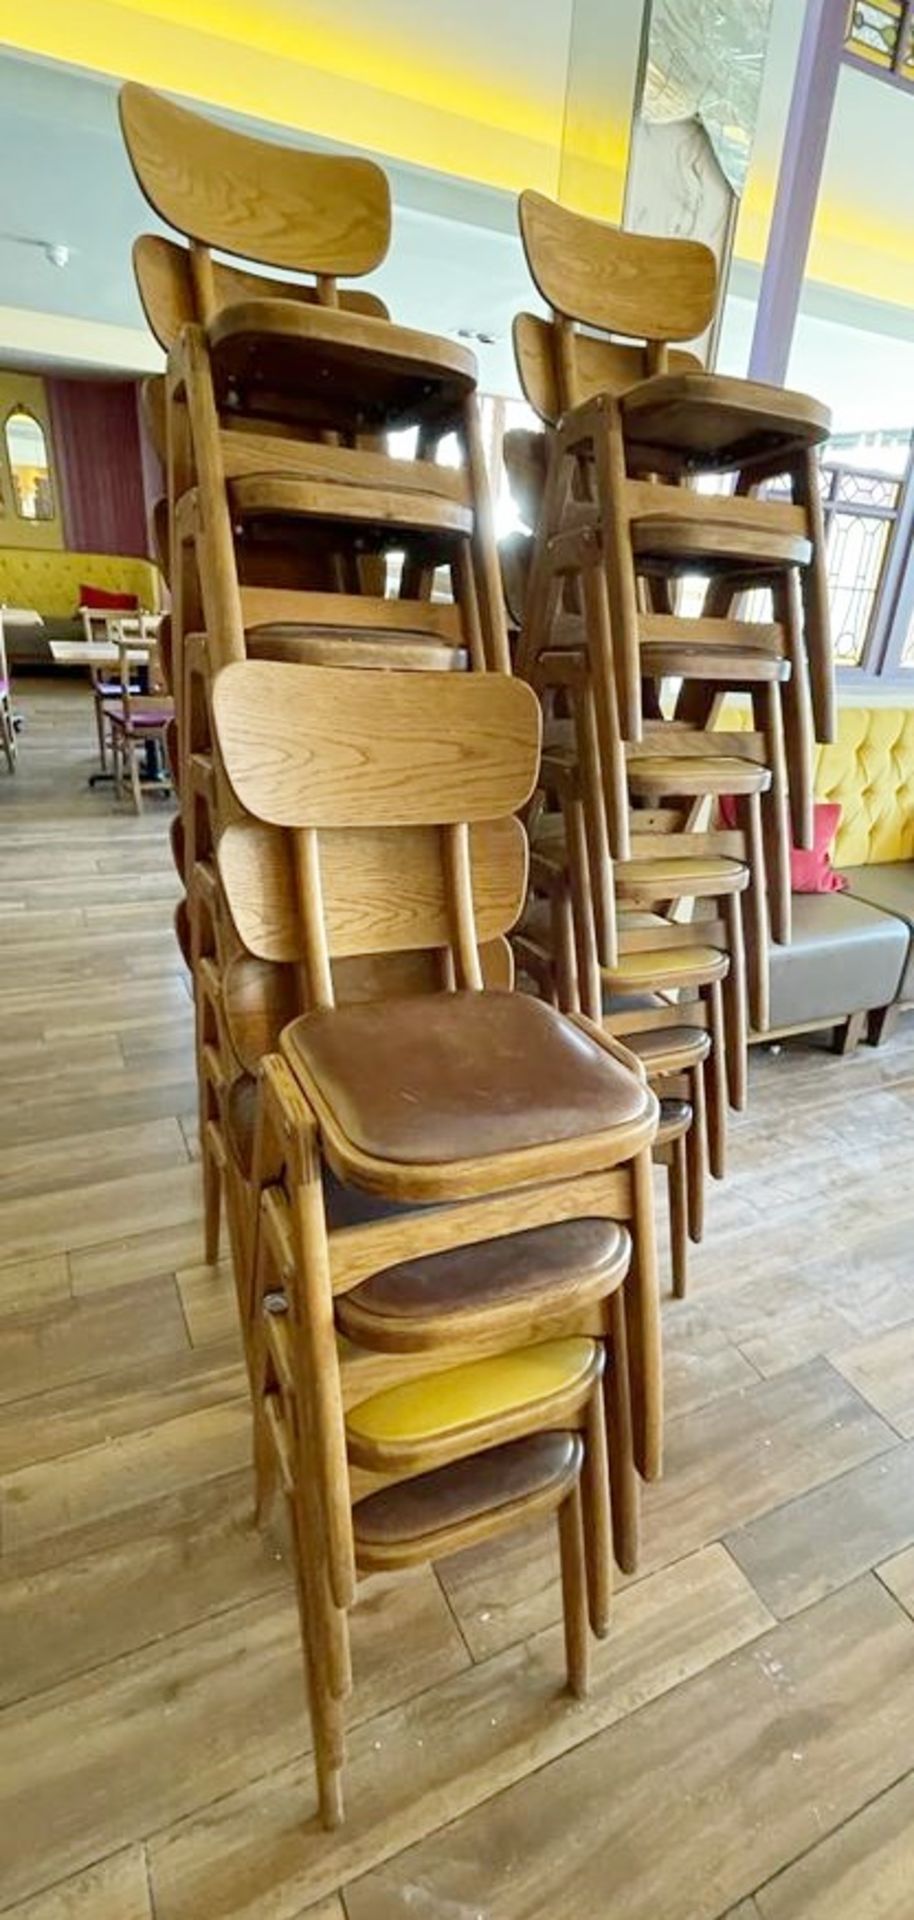 30 x Retro 1960's Style Stacking Dining Chairs - Solid Wood With Curved Backs and Leather Seat - Image 5 of 13